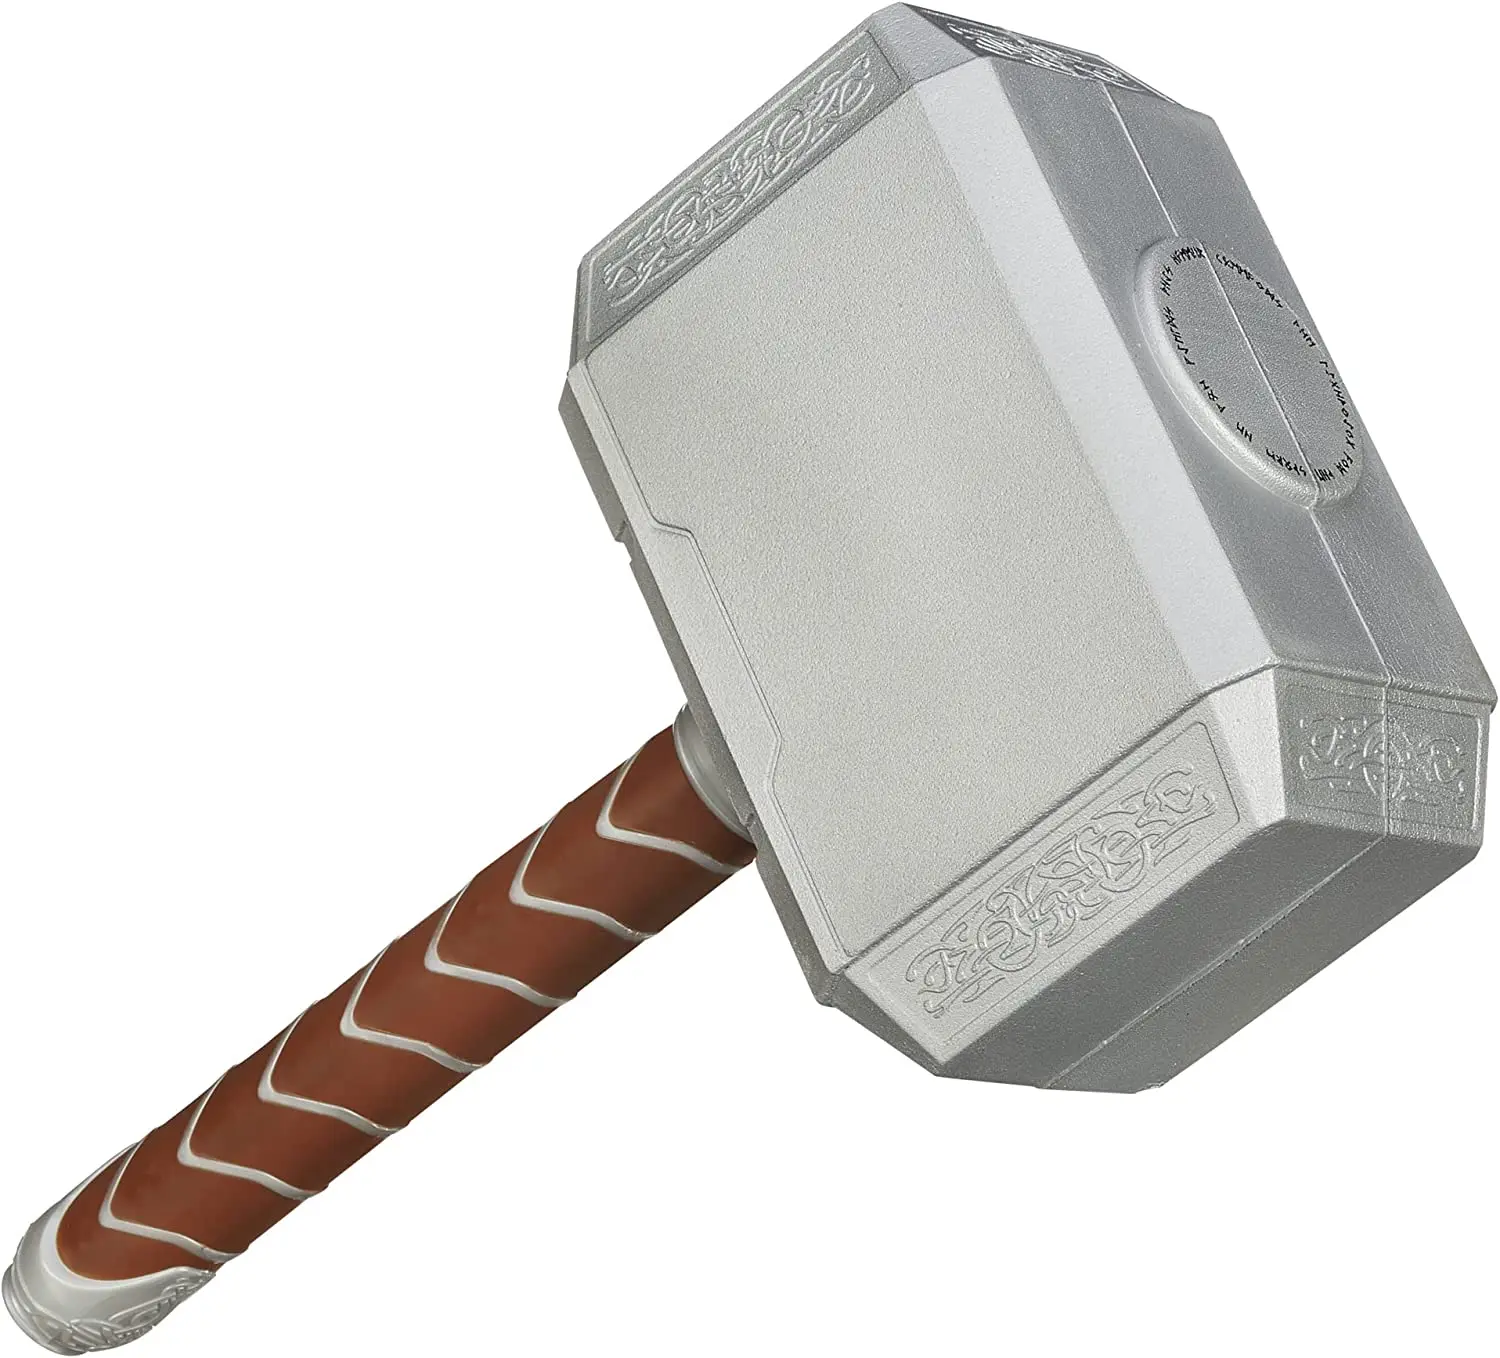 

Hasbro Thor Battle Hammer Roleplay Toy Superhero-Inspired Weapon Accessory for Kids